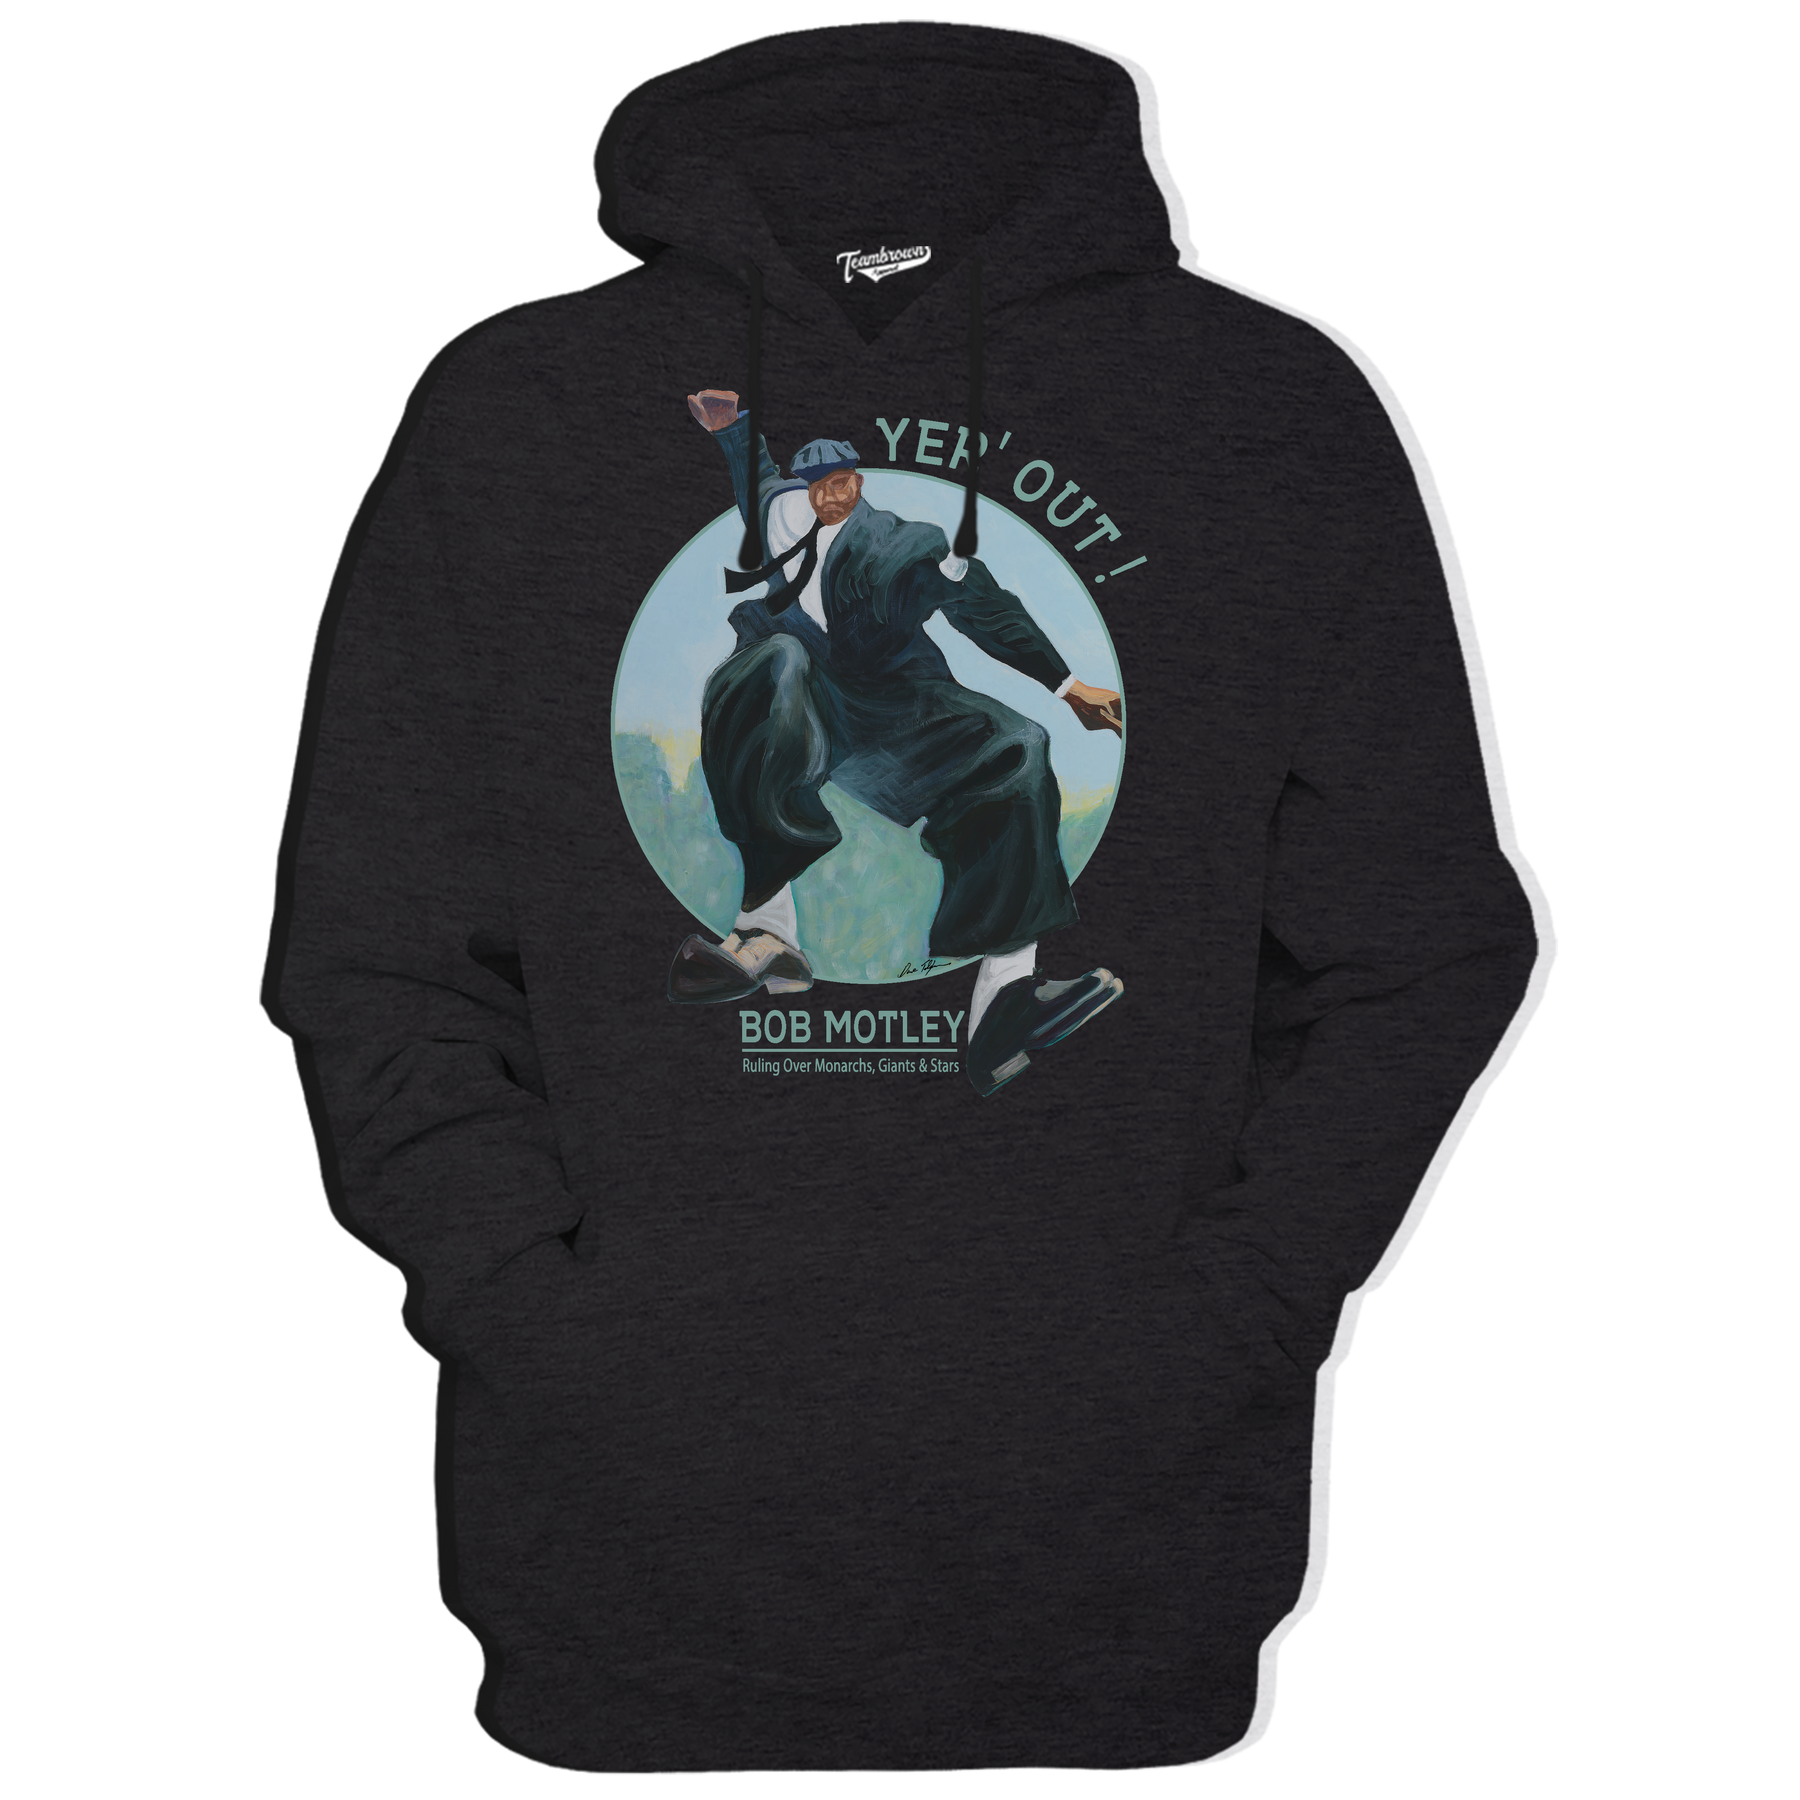 Bob Motley - Yer' Out! - Unisex Premium Hoodie | Officially Licensed - YABBA BIRI PRODUCTIONS, INC.